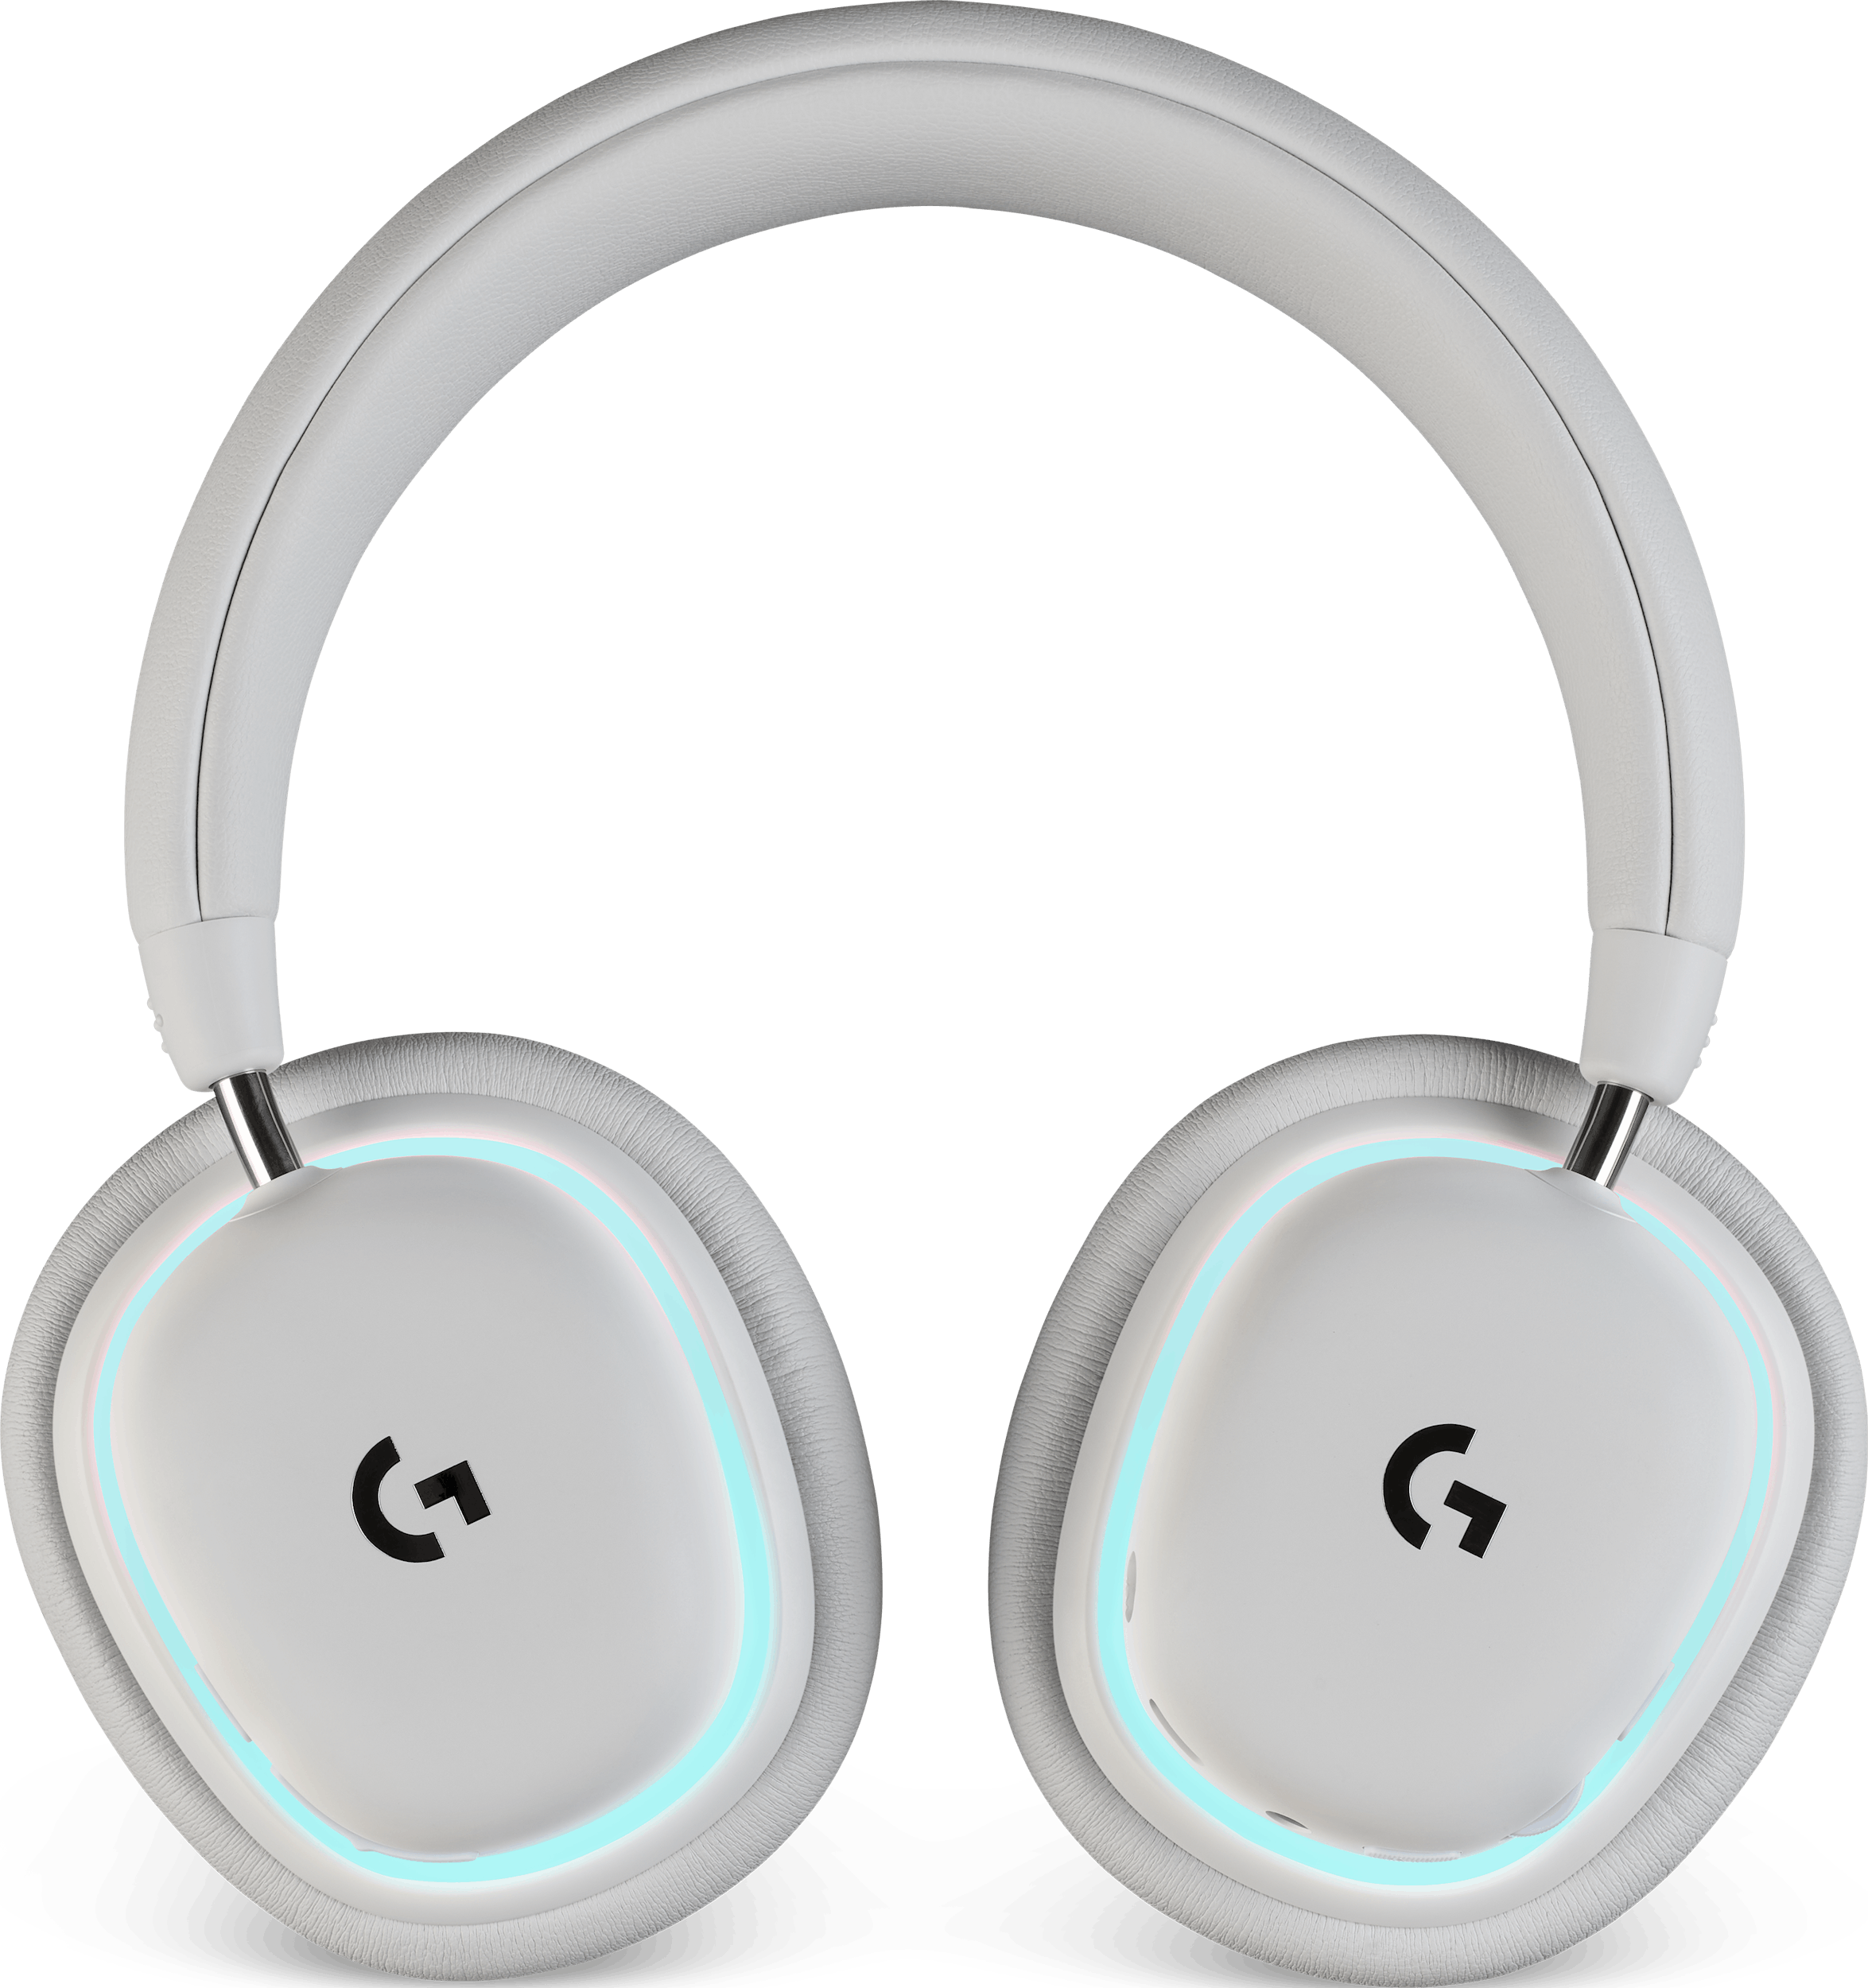 Logitech G735 Review: Not the First White Headset